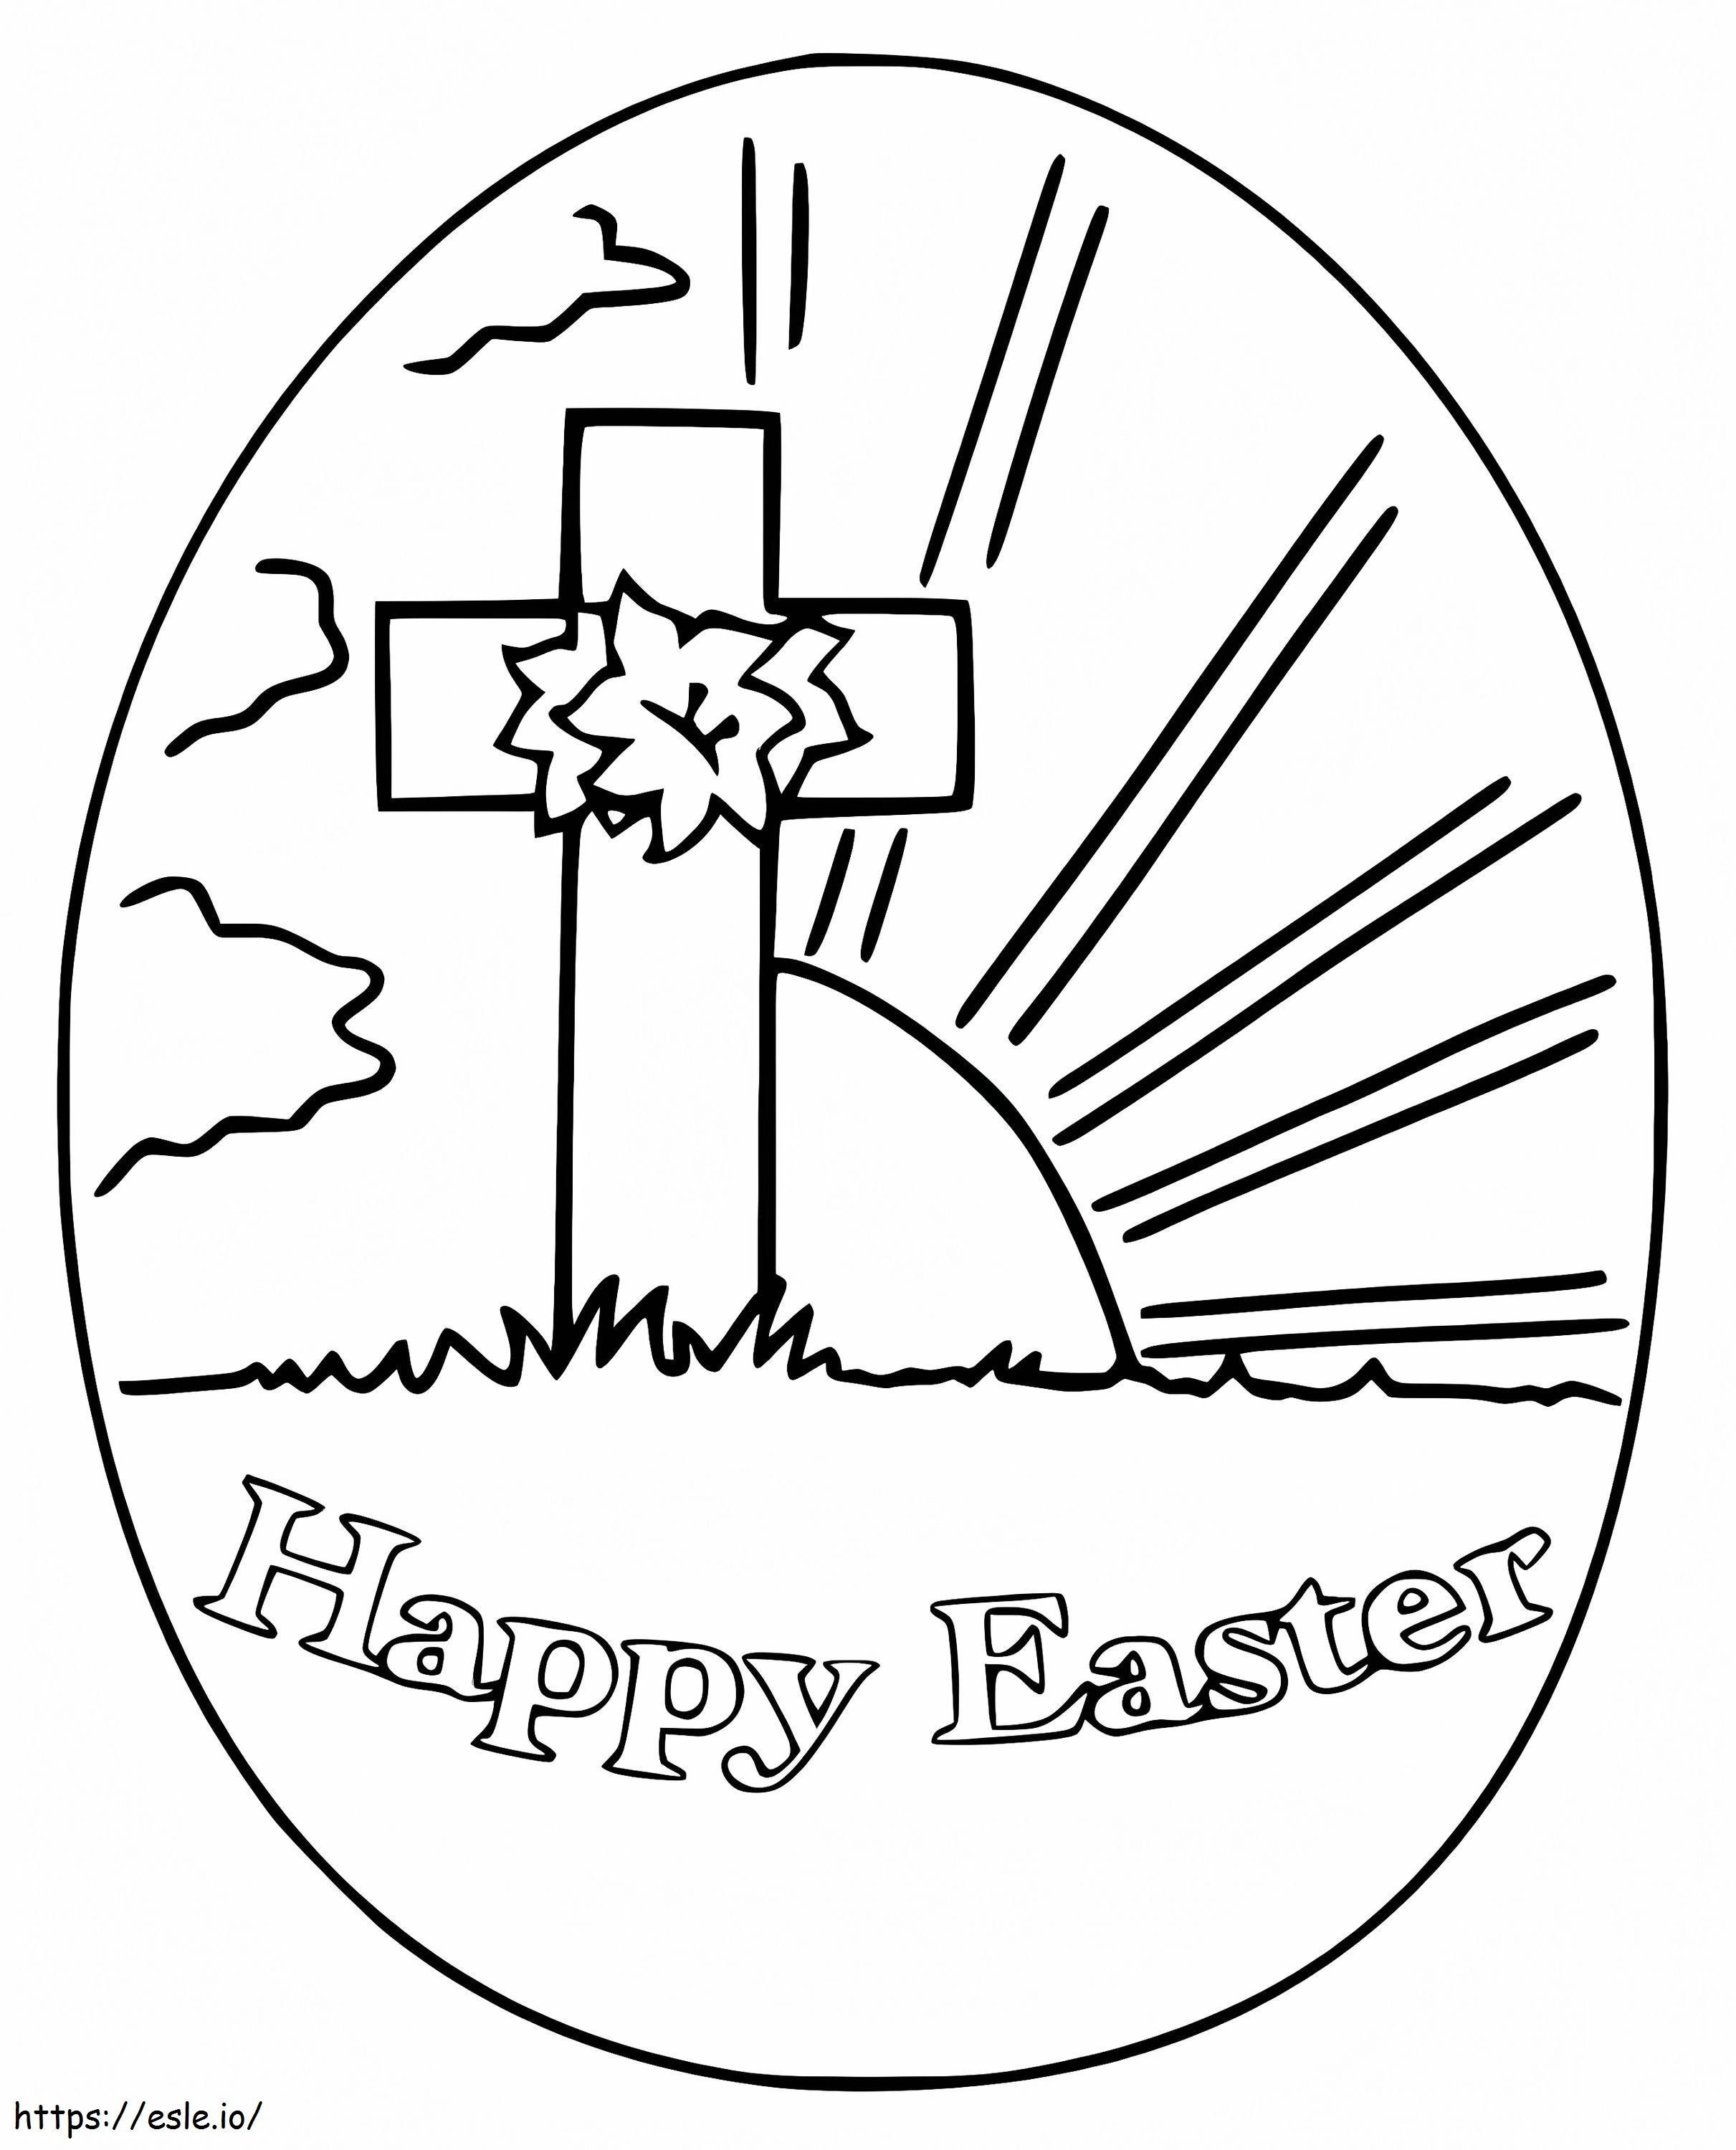 Easter Egg With Cross Pattern coloring page